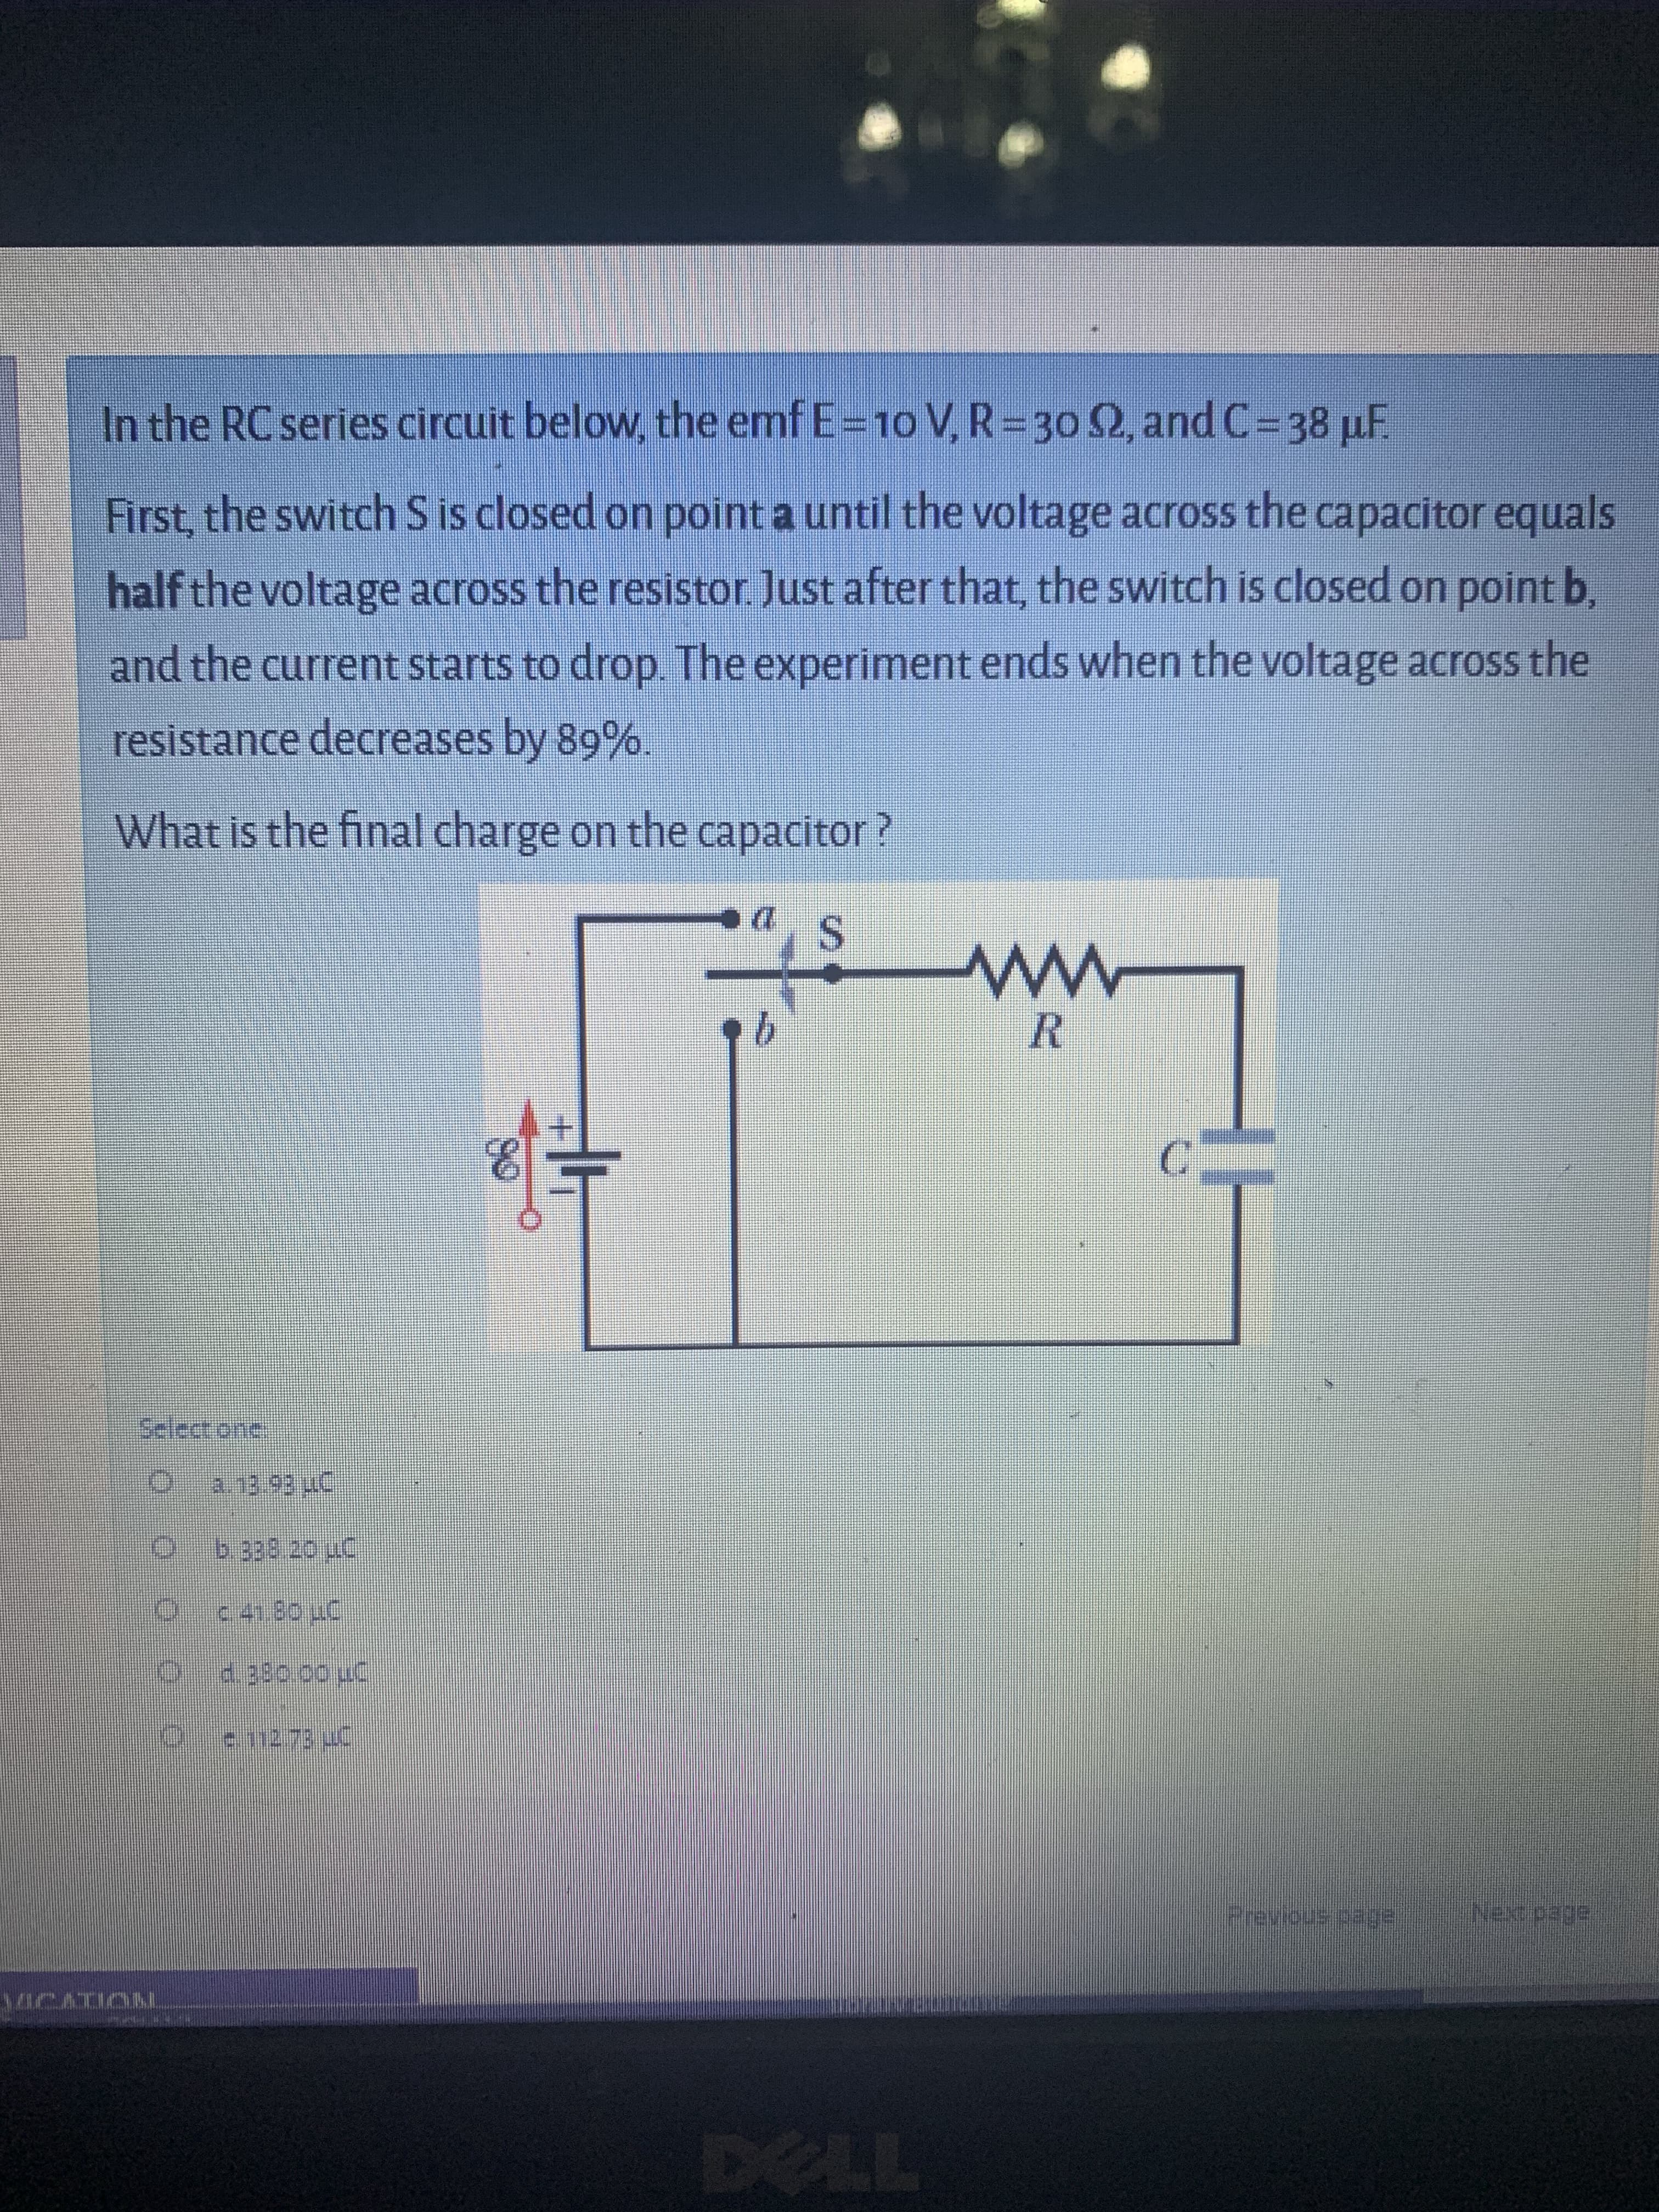 In the RC series circuit below, the emf E=10 V, R=30 2, and C= 38 µF.
First, the switch S is closed on point a until the voltage across the capacitor equals
half the voltage across the resistor Just after that, the switch is closed on point b,
